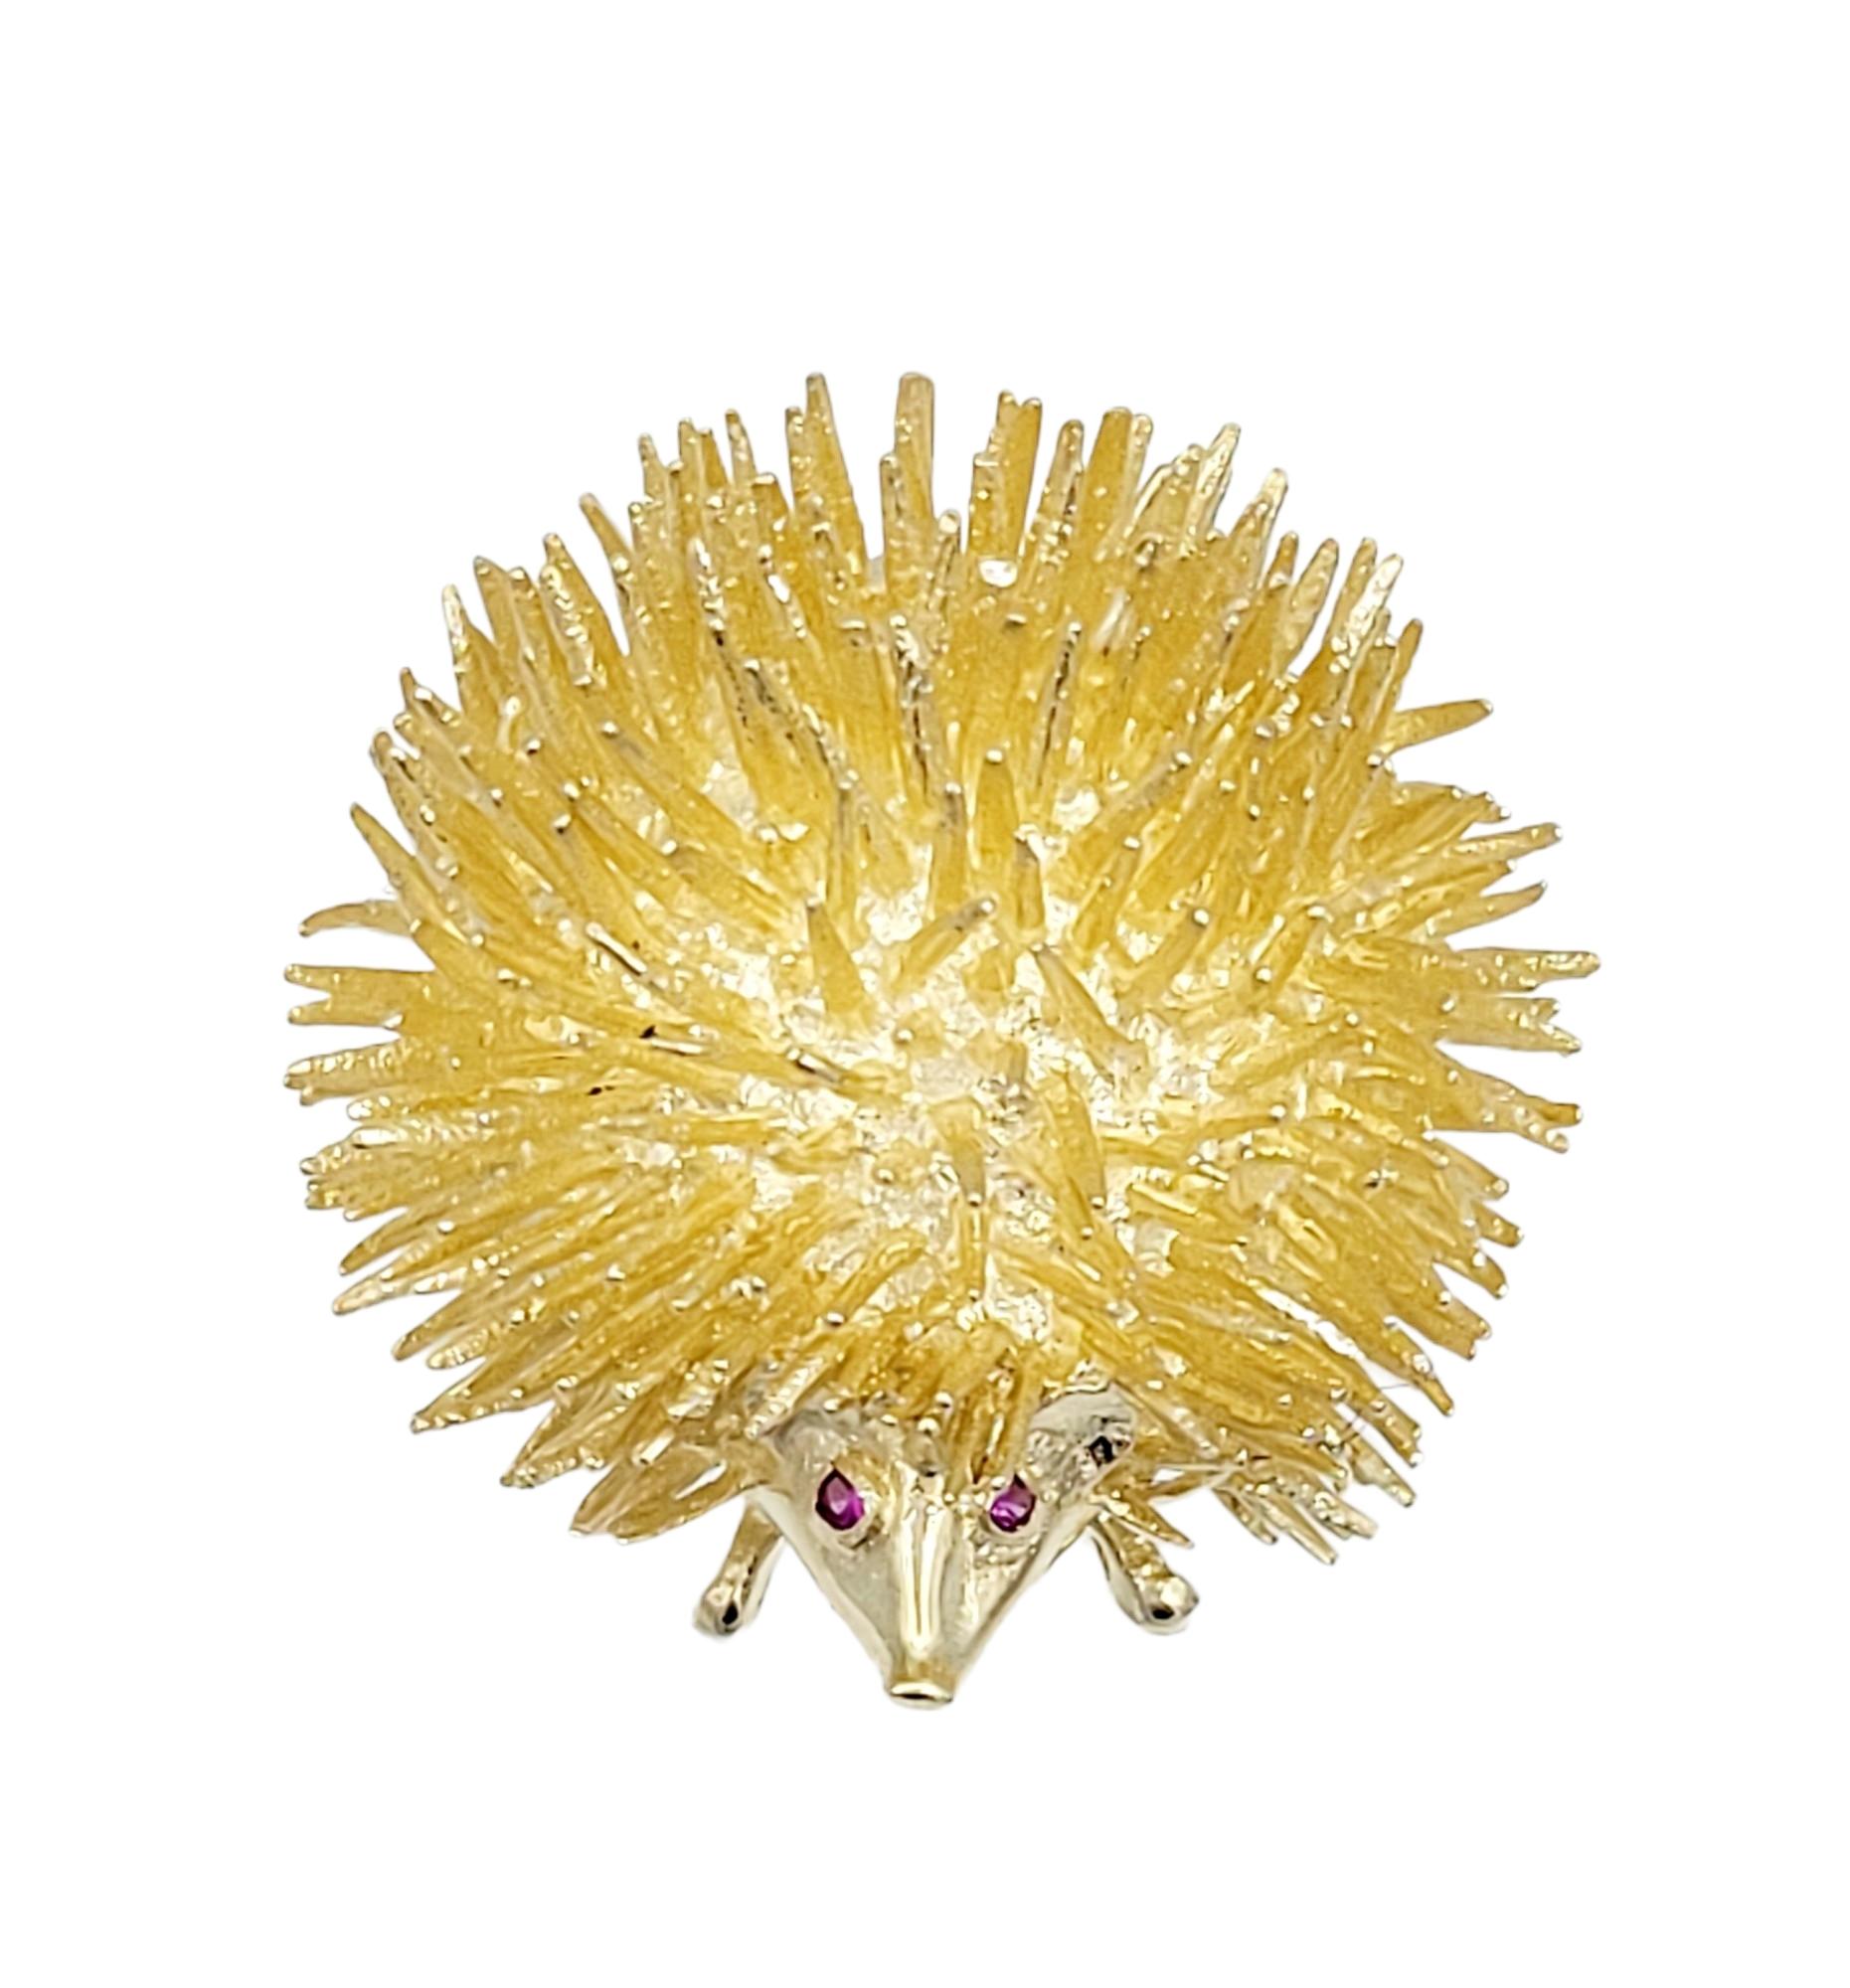 This delightful little hedgehog brooch, set in 14 karat yellow gold, is a charming and whimsical piece of jewelry. The round shape of the hedgehog is adorned with an array of gold spikes, creating a playful and textured appearance. The brooch is